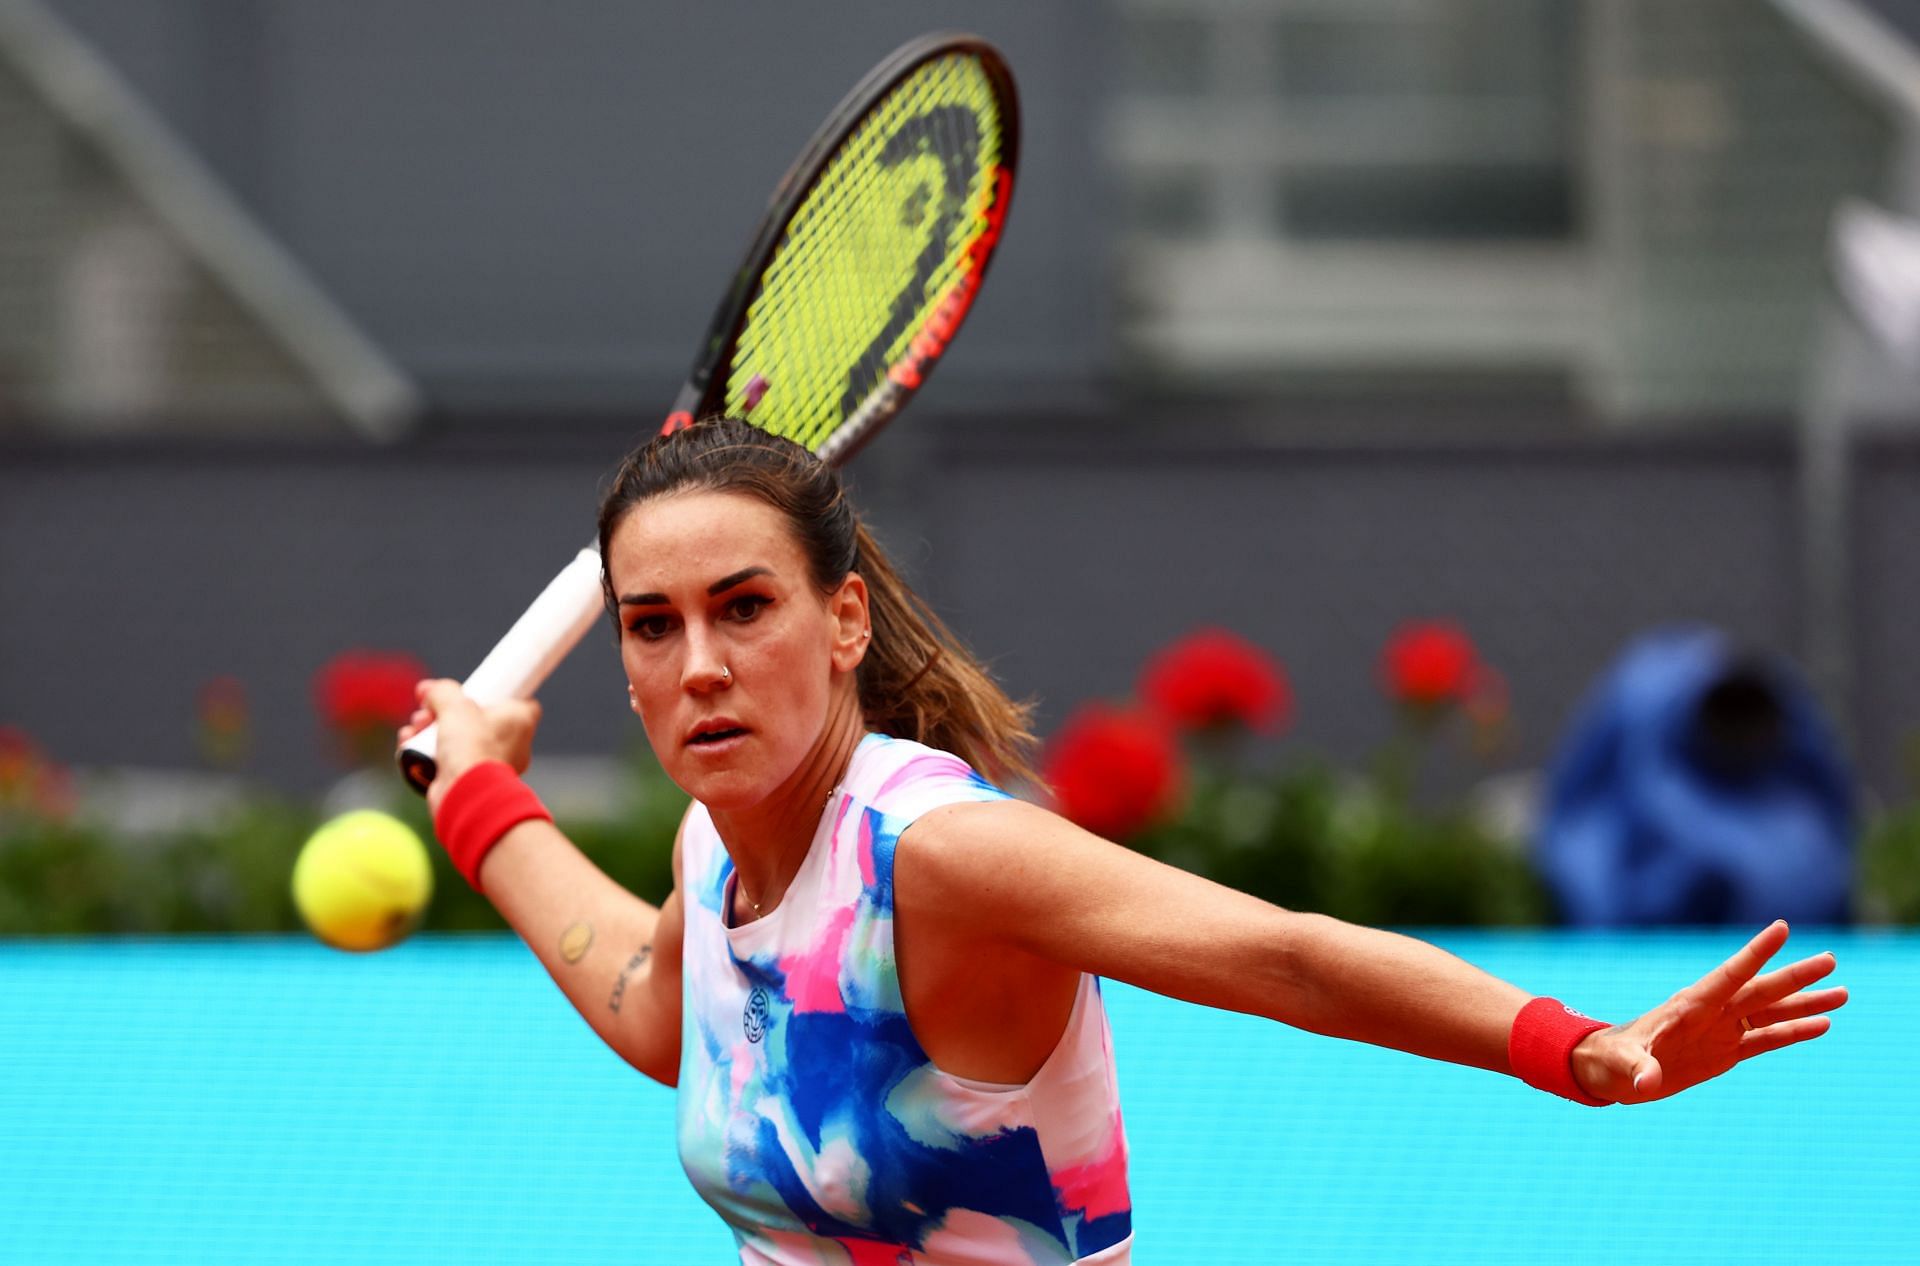  Nuria Parrizas-Diaz at the Mutua Madrid Open - Day 3